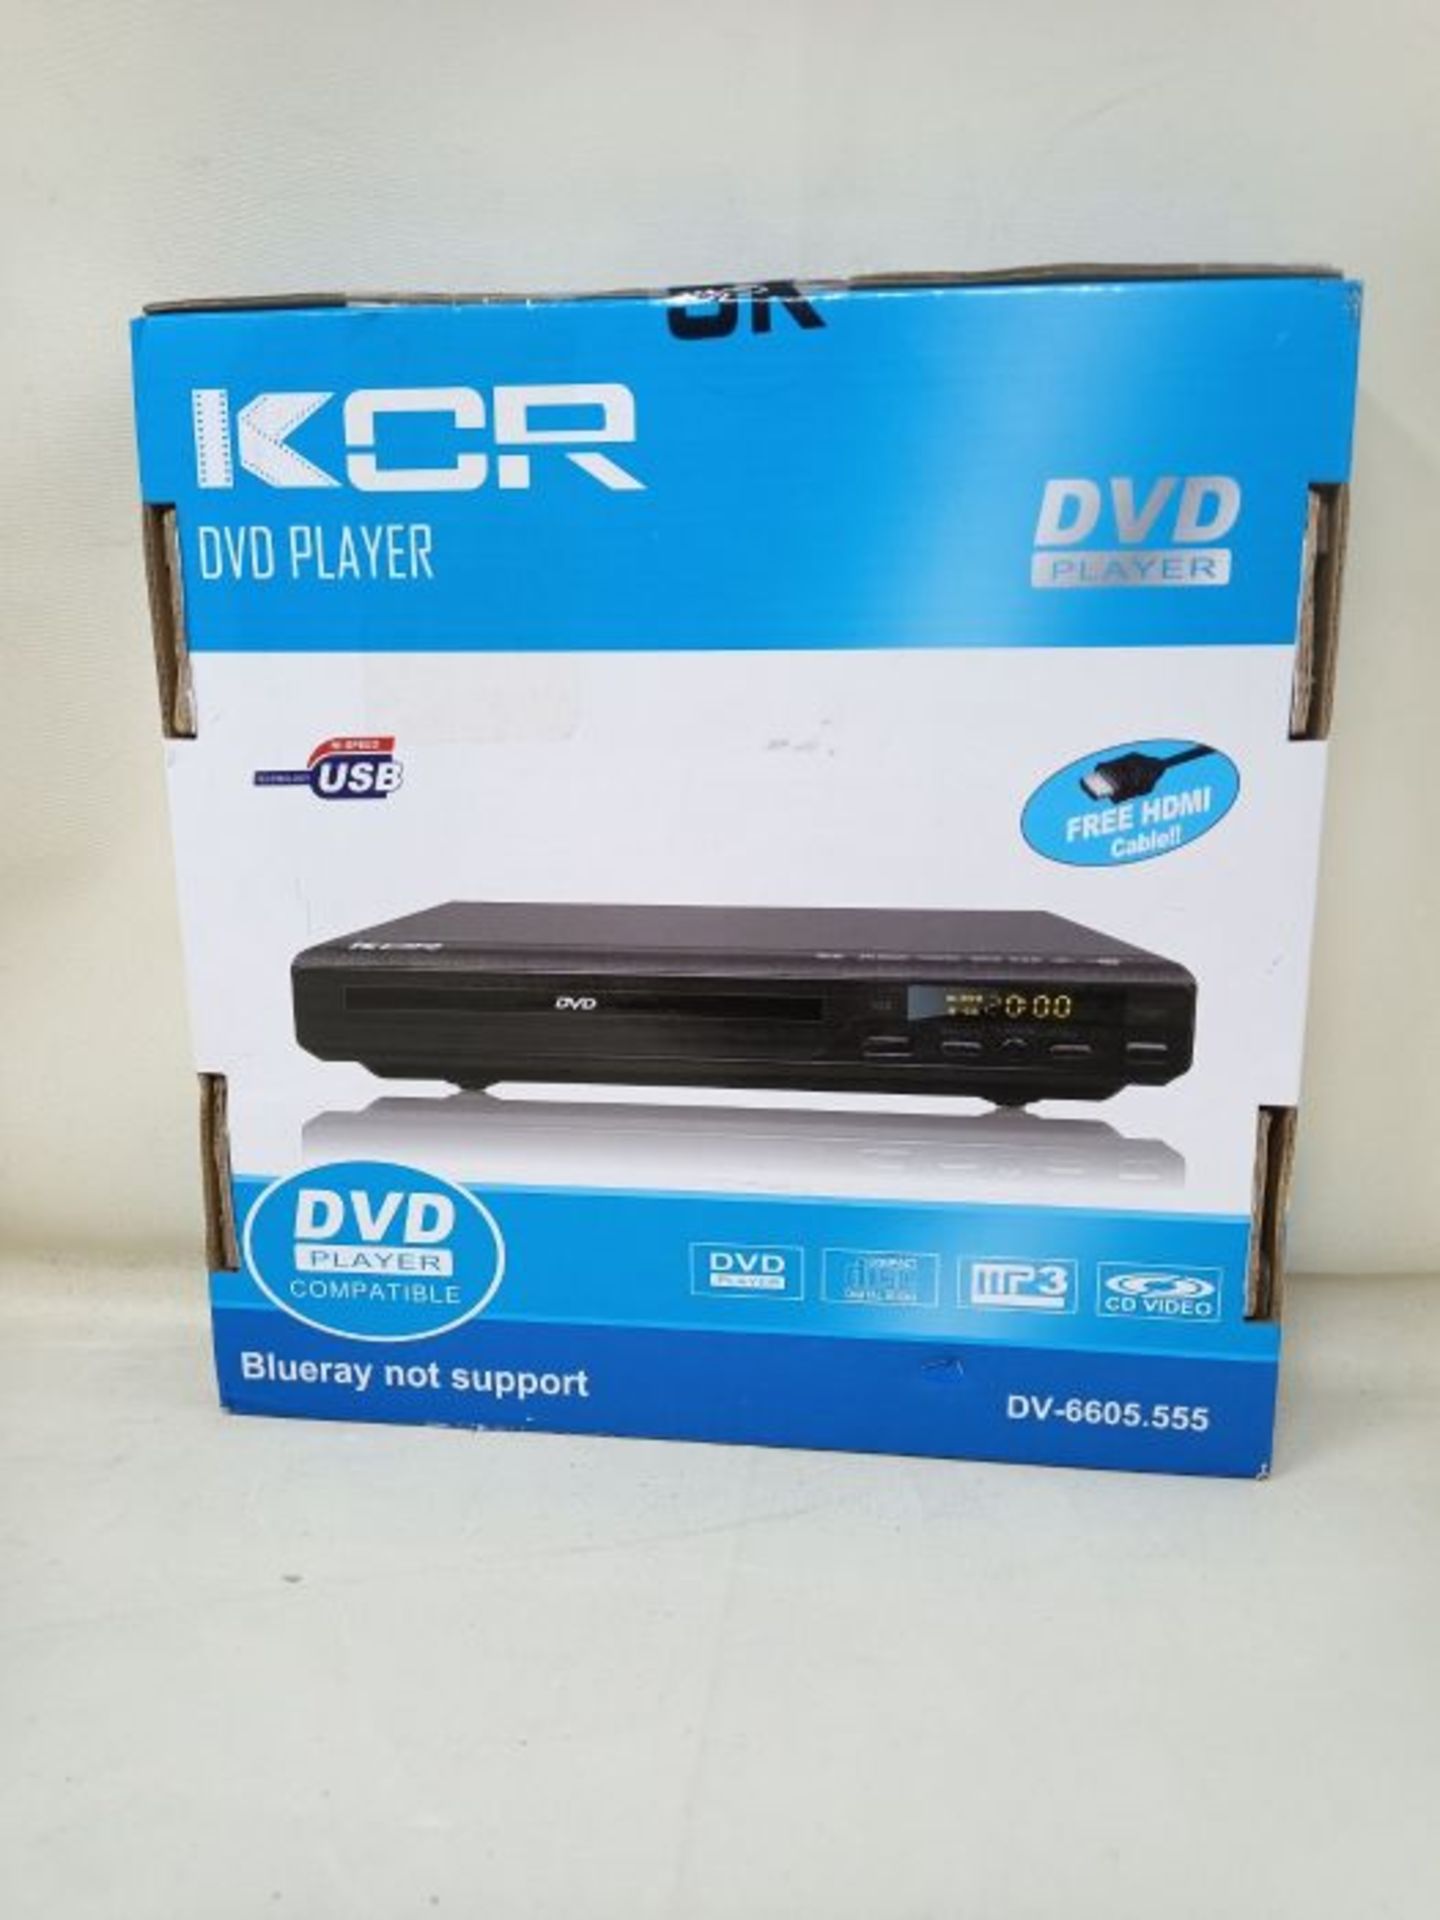 SOYAR DVD Player - Compatible with CD, DVD, MP3 Players with Remote Control, USB Plug - Image 2 of 3